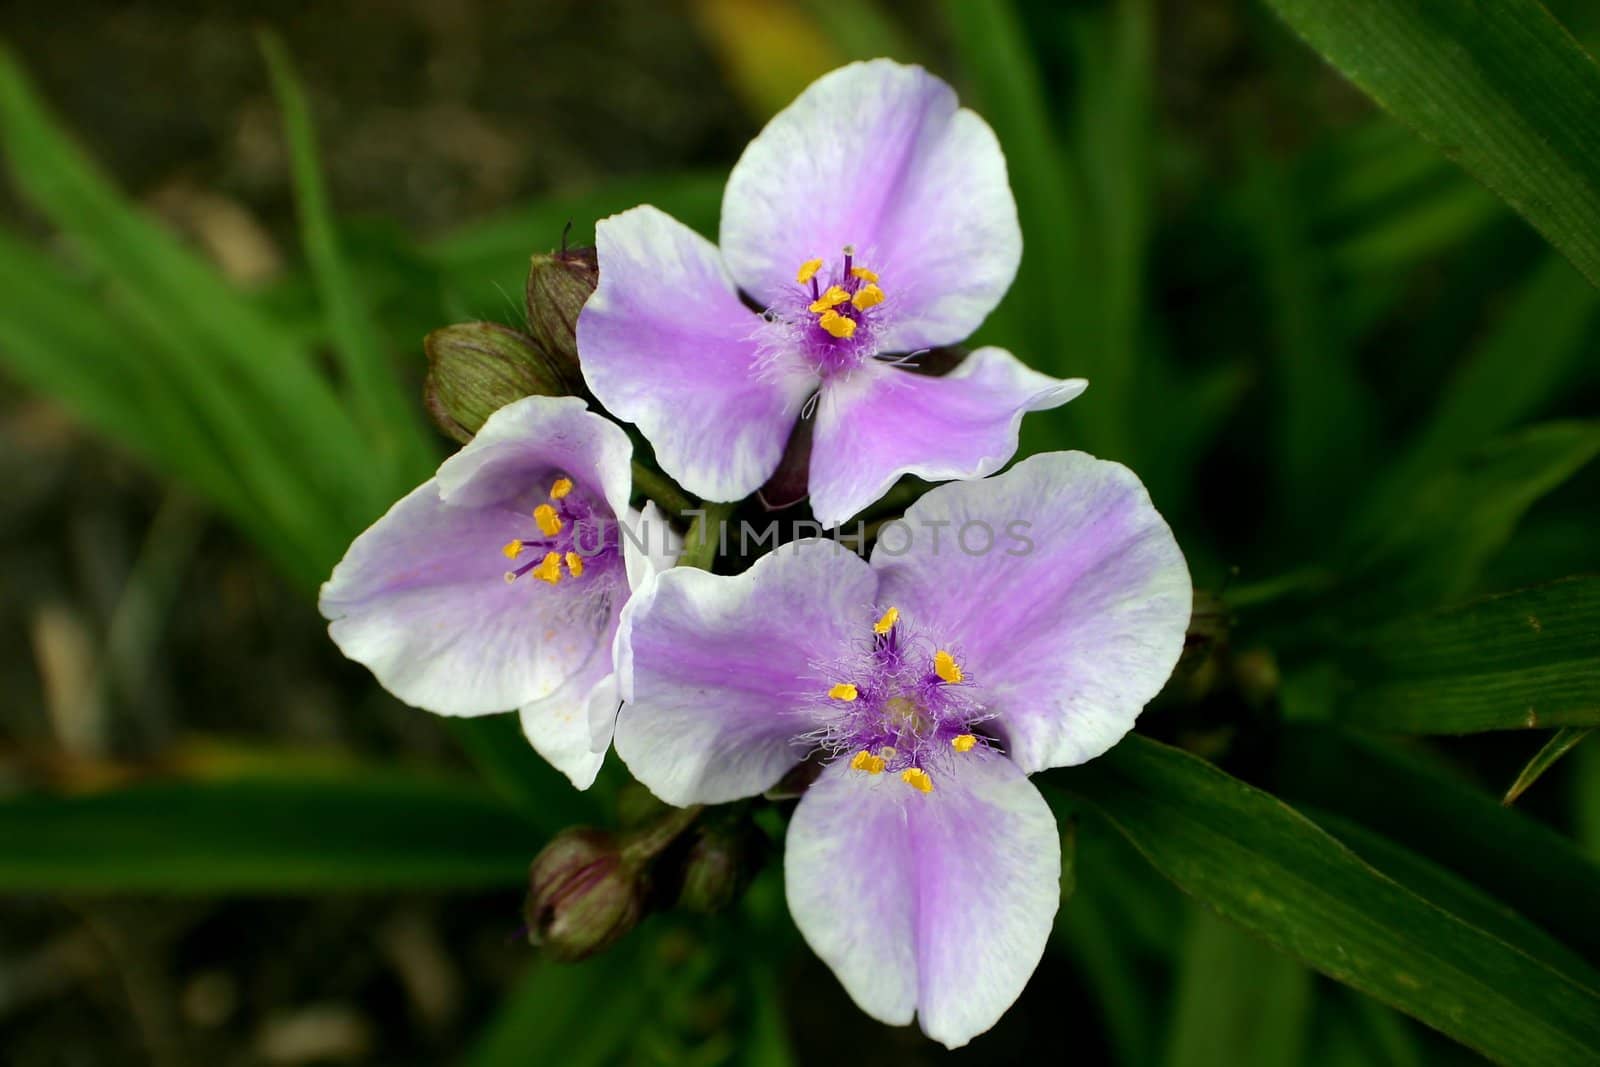 Grouping of three purple and white flowers